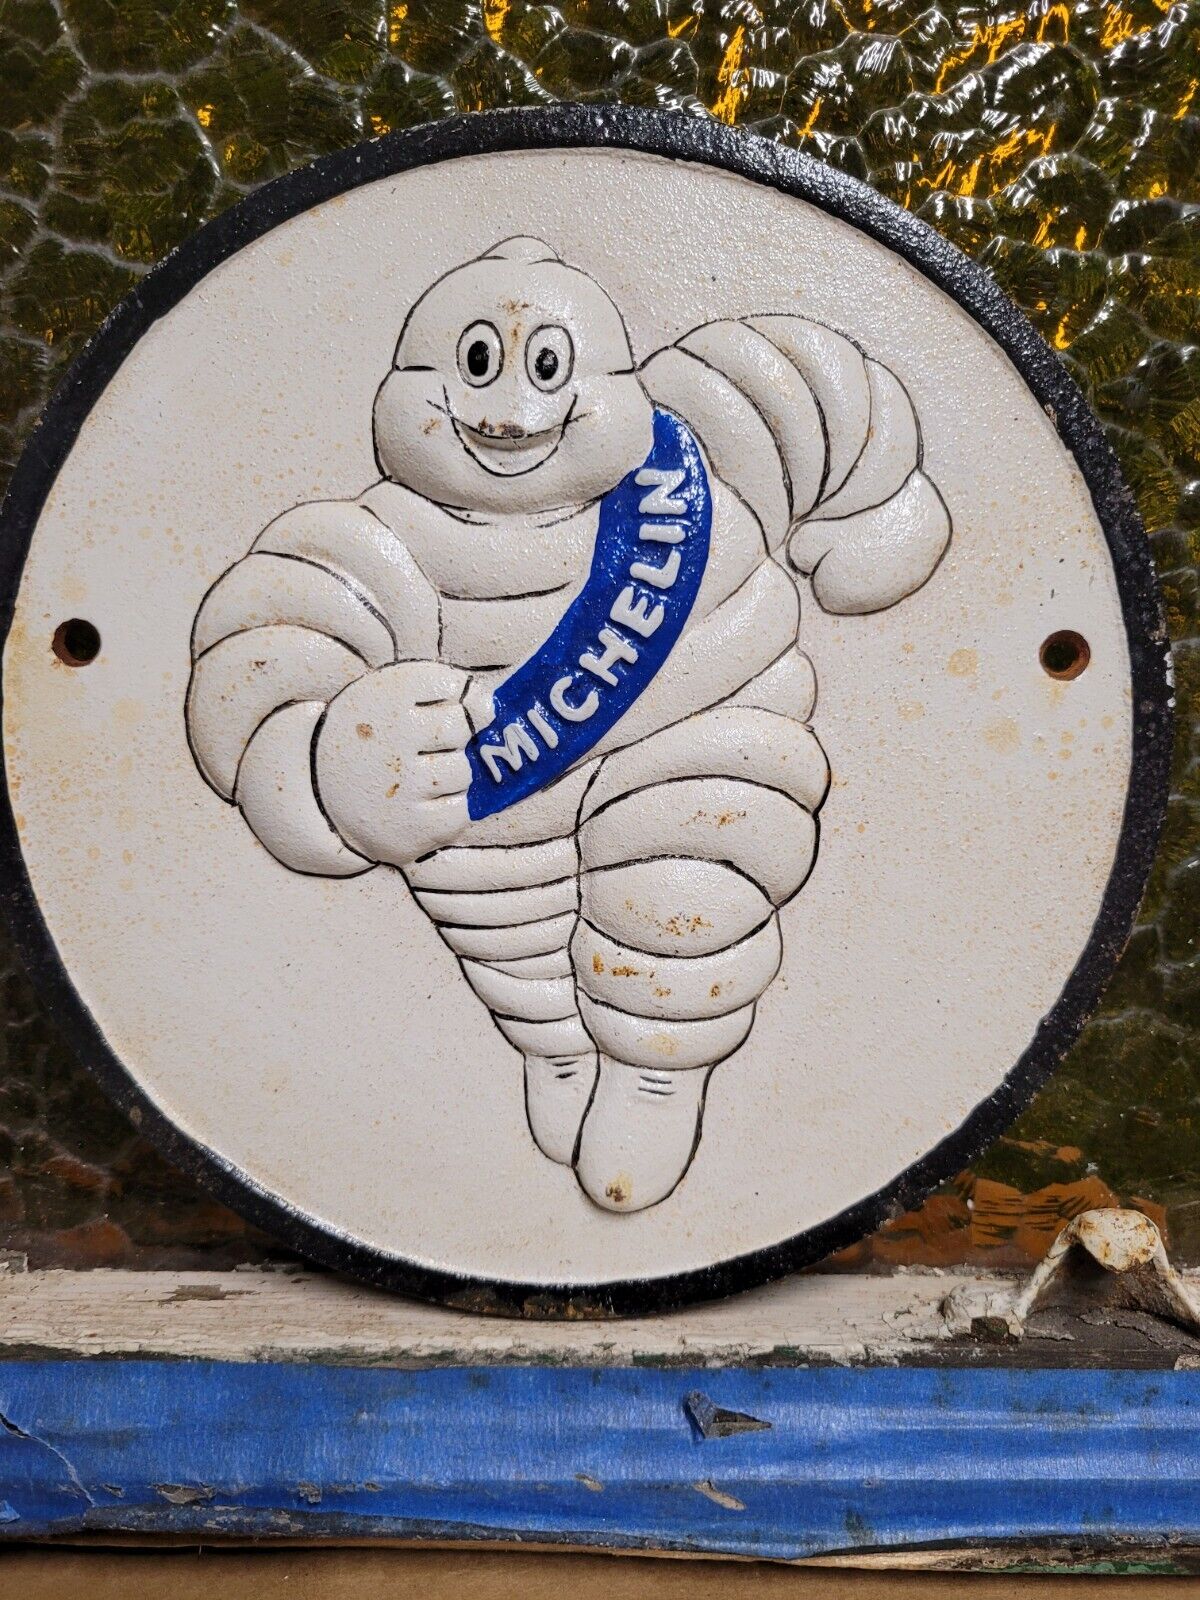 VINTAGE MICHELIN MAN SIGN OLD CAST IRON AUTOMOBILE CAR TRUCK PARTS TIRE COMPANY